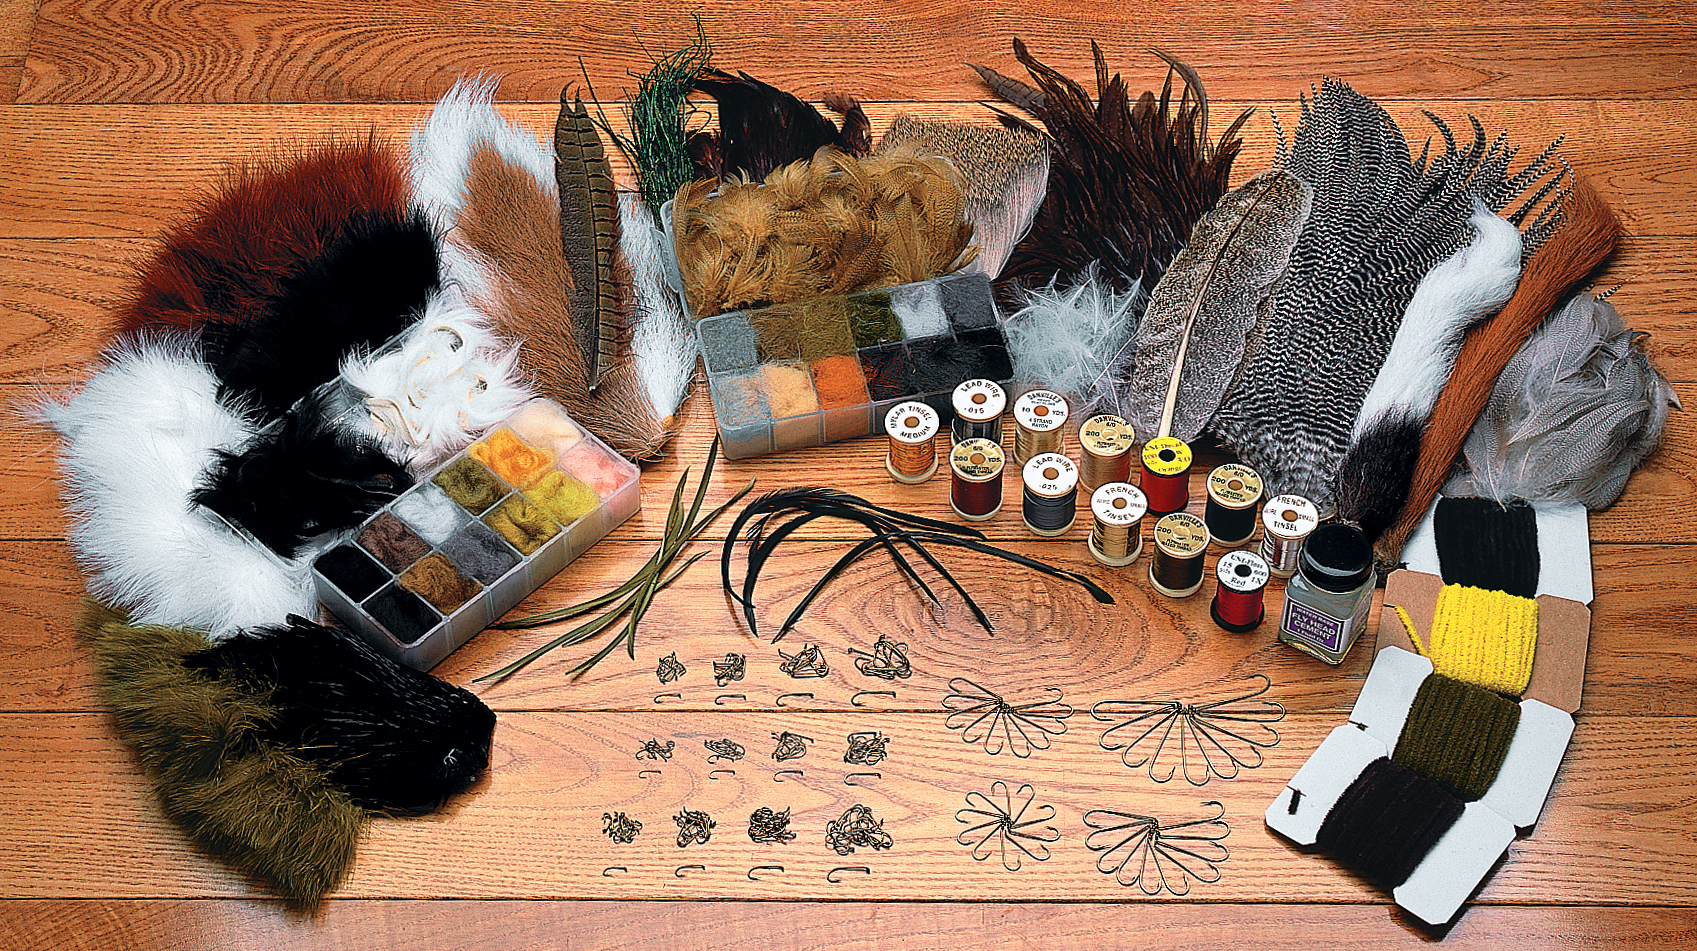 Colorado Anglers Supply Gunnison River Fly-Tying Kit